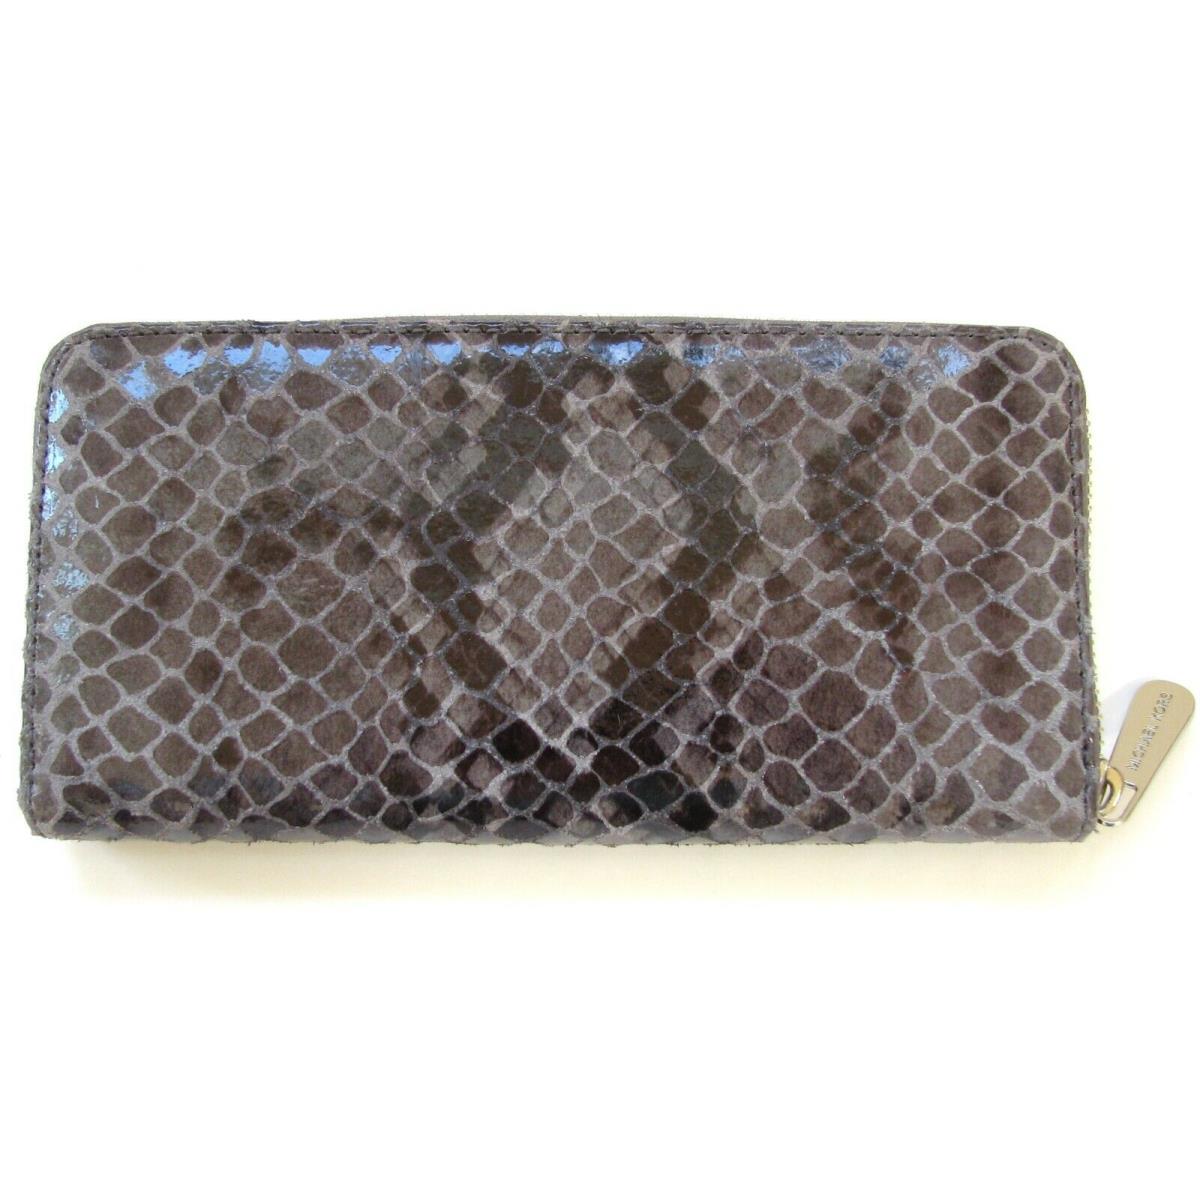 Michael Kors Items Black Gray+brown Python Embossed Leather Clutch Wallet-new